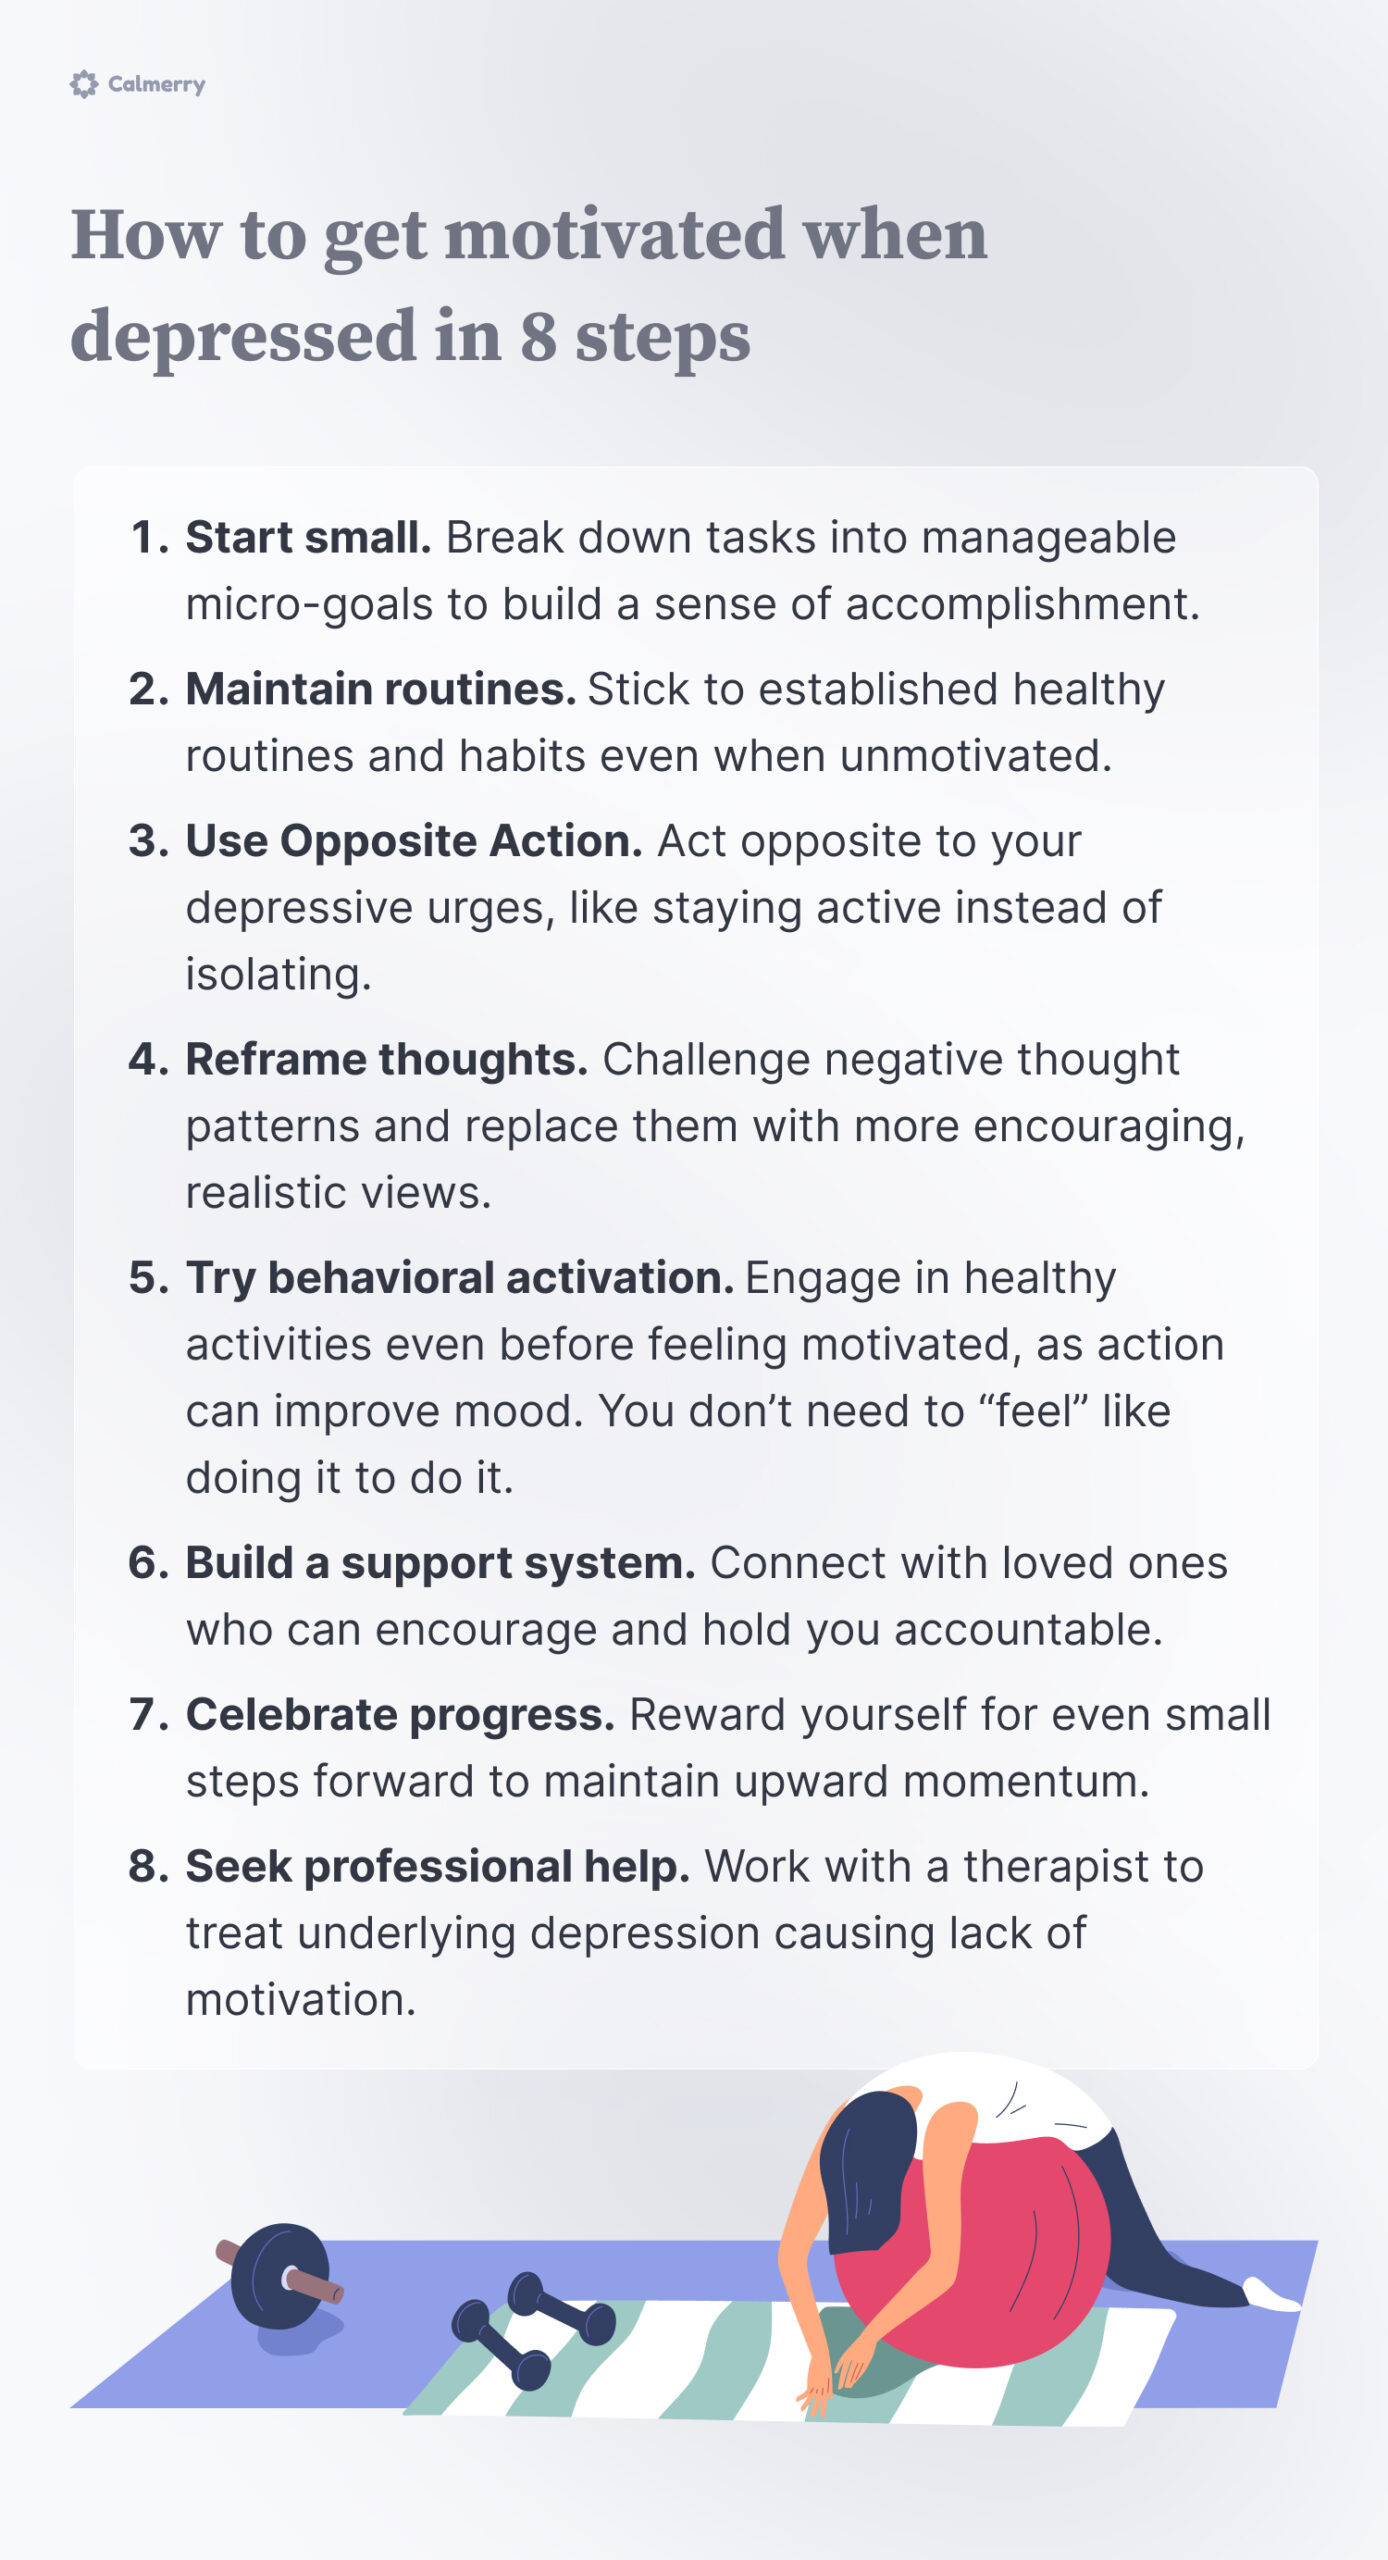 How to get motivated when depressed in 8 steps
Start small. Break down tasks into manageable micro-goals to build a sense of accomplishment.
Maintain routines. Stick to established healthy routines and habits even when unmotivated.
Use Opposite Action. Act opposite to your depressive urges, like staying active instead of isolating.
Reframe thoughts. Challenge negative thought patterns and replace them with more encouraging, realistic views.
Try behavioral activation. Engage in healthy activities even before feeling motivated, as action can improve mood. You don’t need to “feel” like doing it to do it.
Build a support system. Connect with loved ones who can encourage and hold you accountable.
Celebrate progress. Reward yourself for even small steps forward to maintain upward momentum.
Seek professional help. Work with a therapist to treat underlying depression causing lack of motivation.